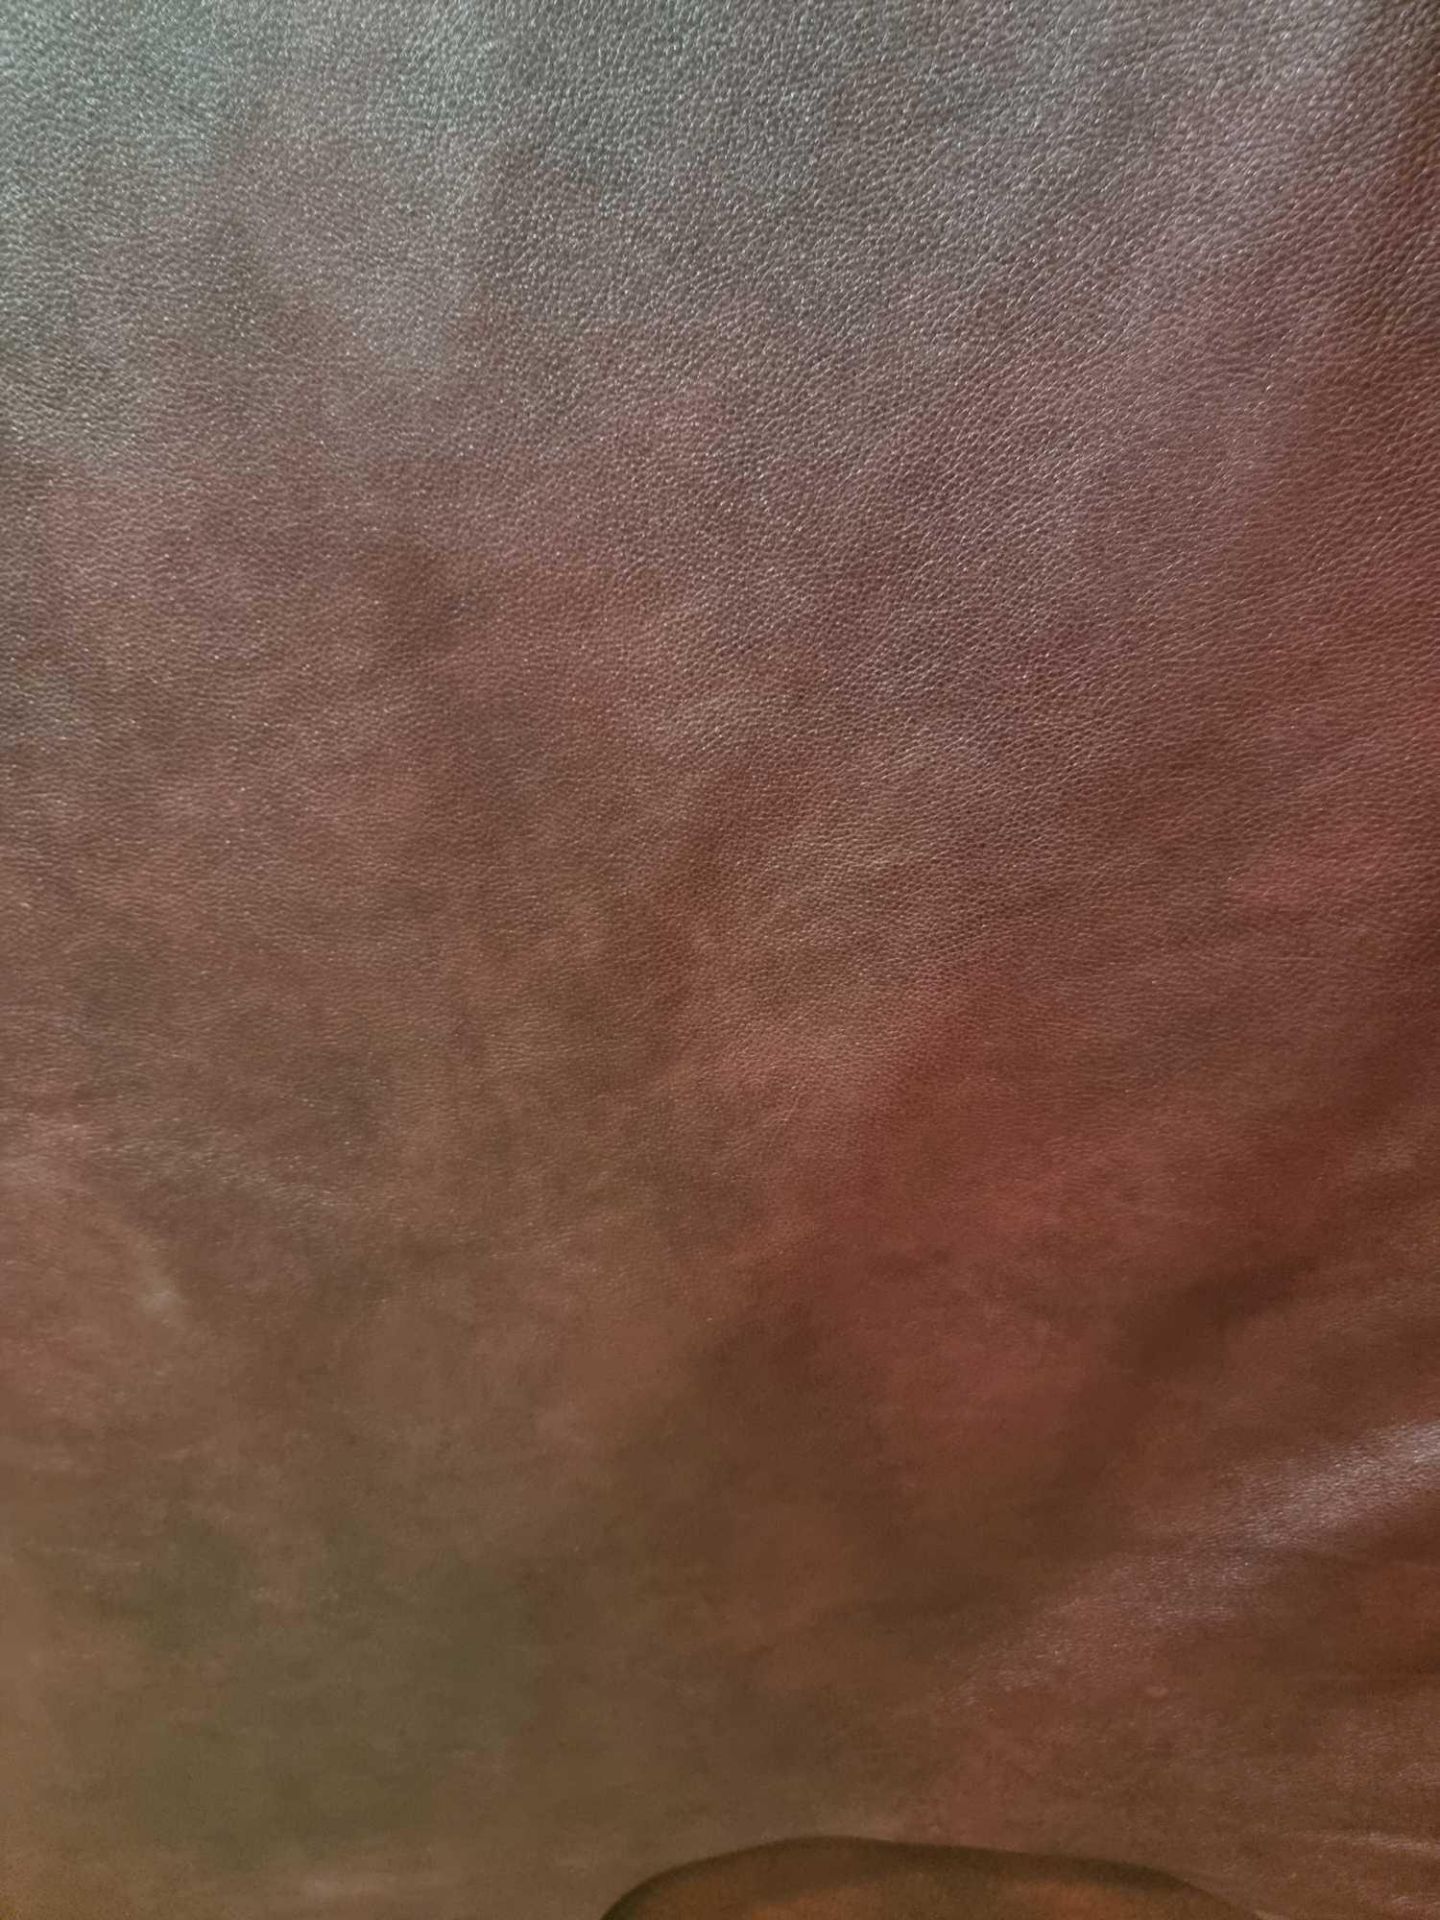 Palazzo Grenadine Leather Hide approximately 3.99mÂ² 2.1 x 1.9cm ( Hide No,42) - Image 2 of 2